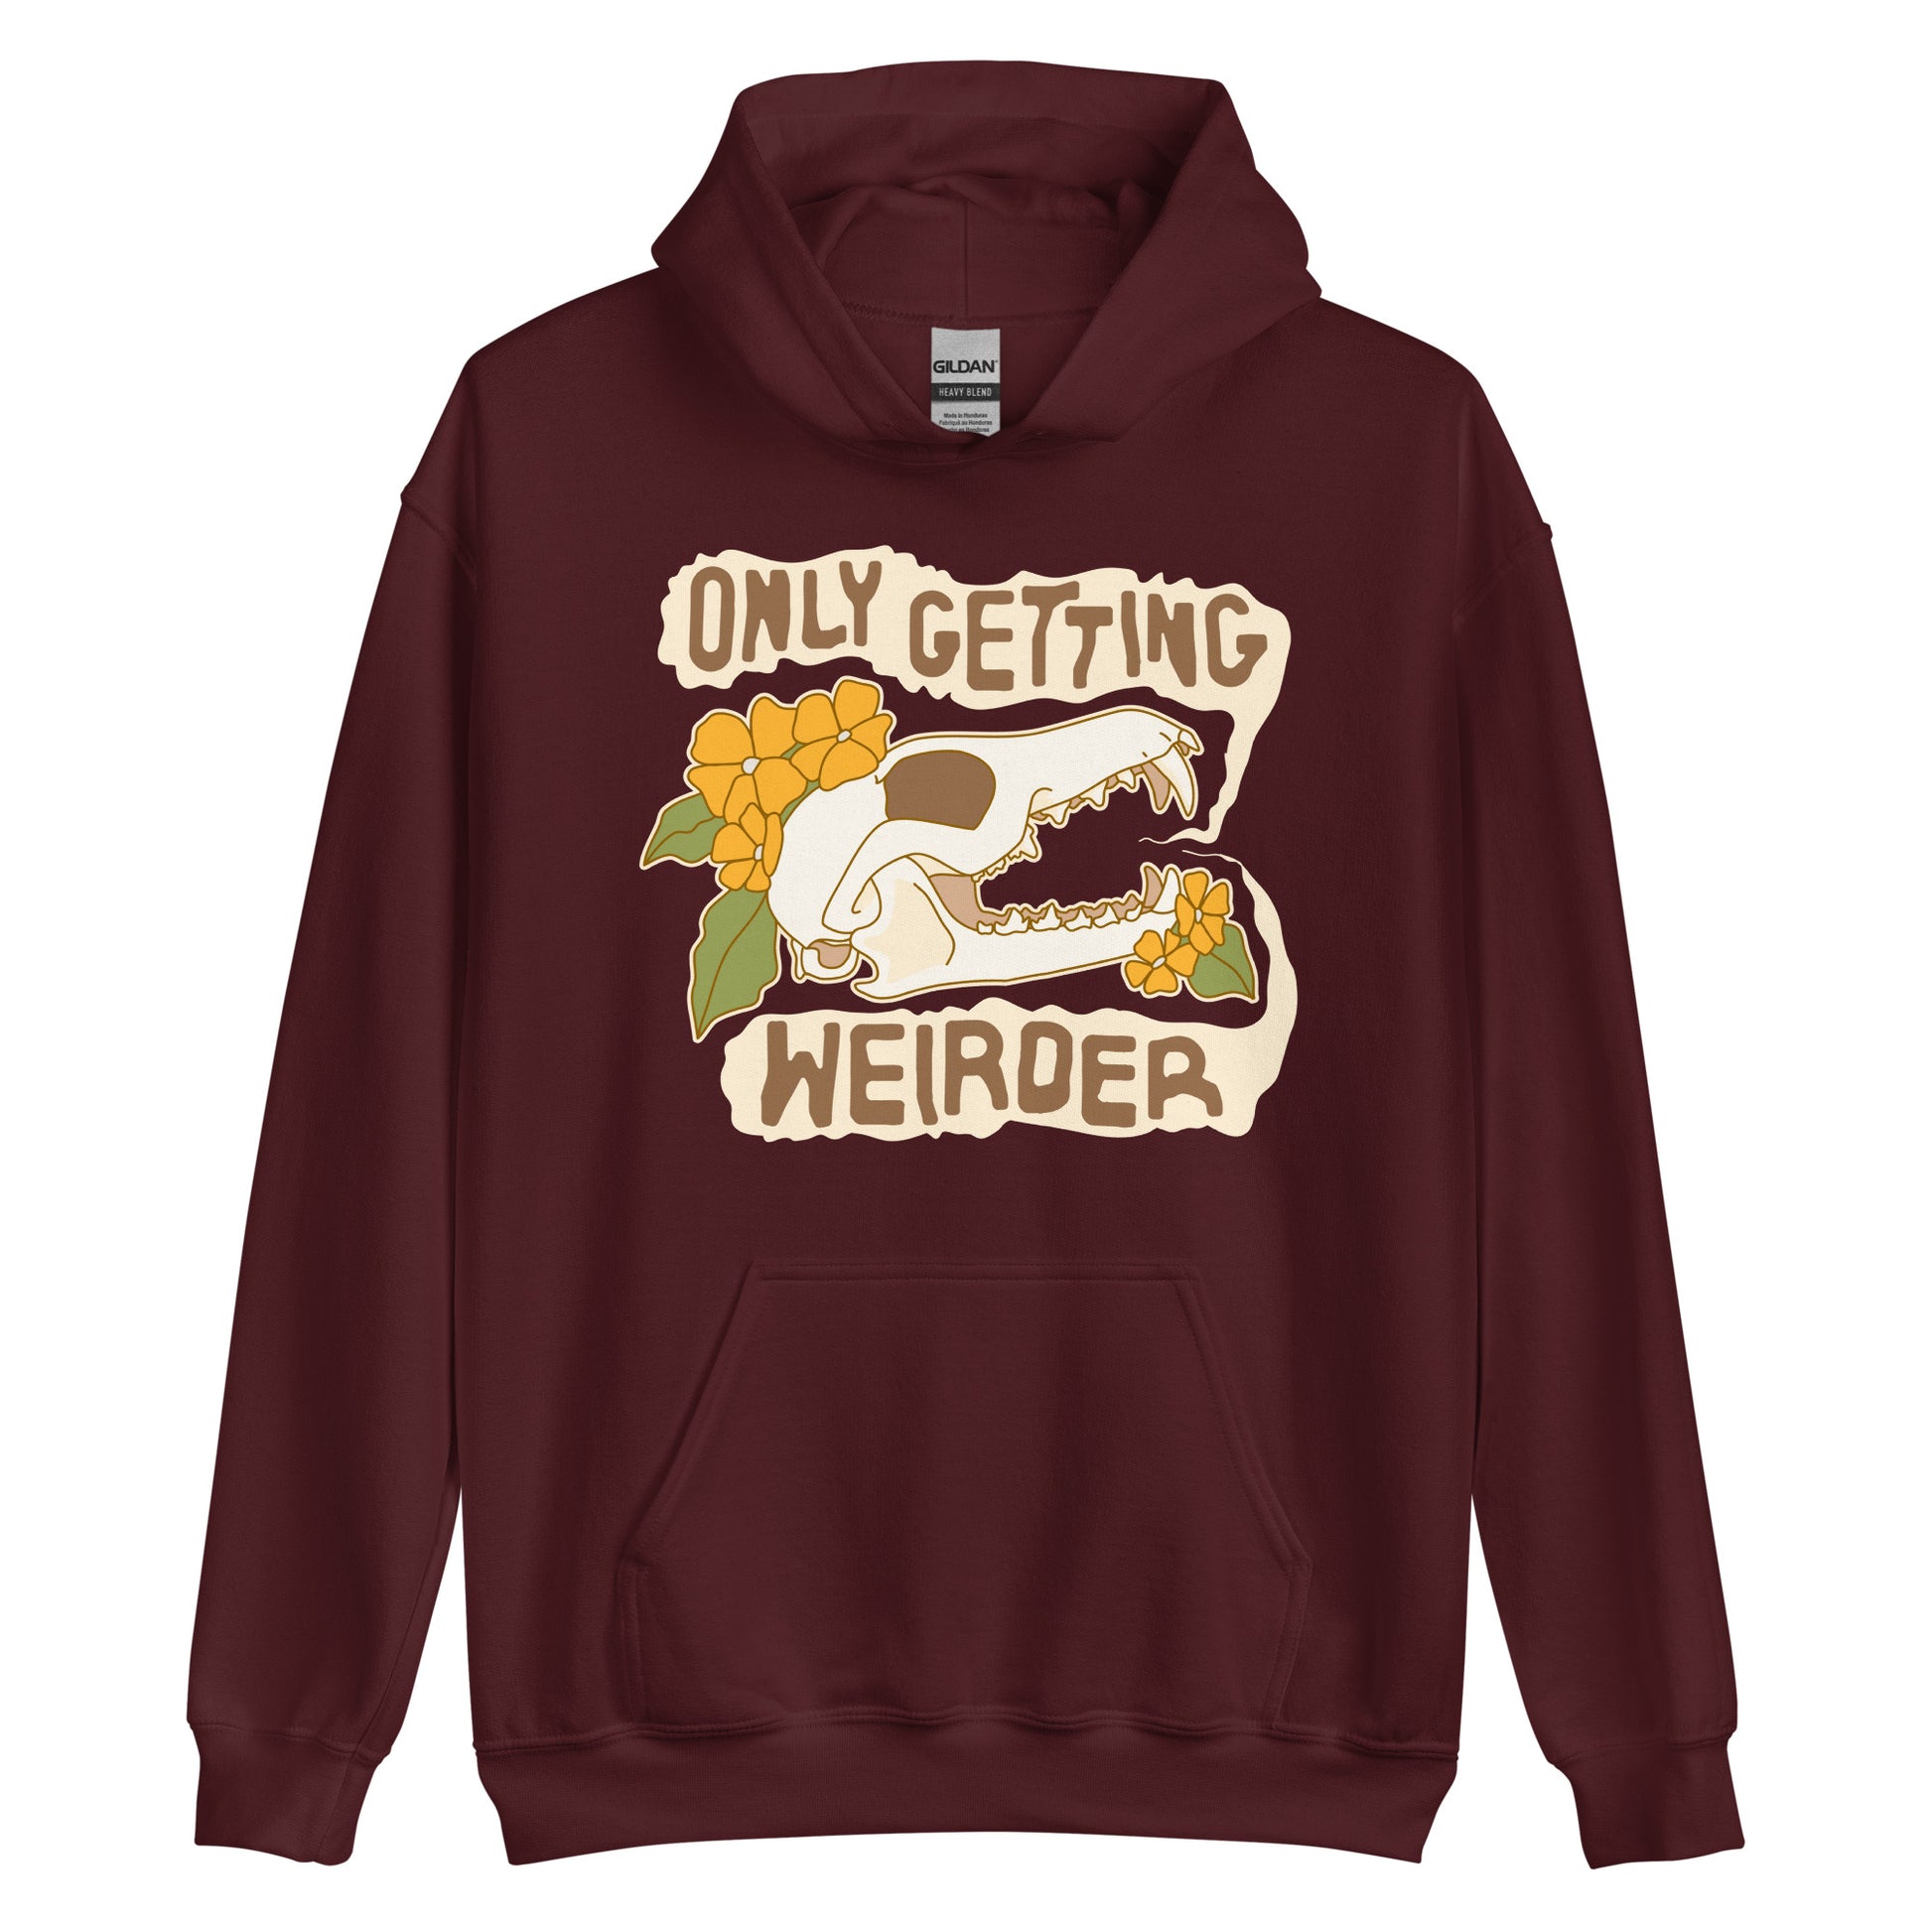 A maroon hooded sweatshirt featuring an illustration of a fox skull surrounded by yellow flowers. Wobbly speech bubbles are coming from the fox's mouth. The text inside the bubbles reads "ONLY GETTING WEIRDER".